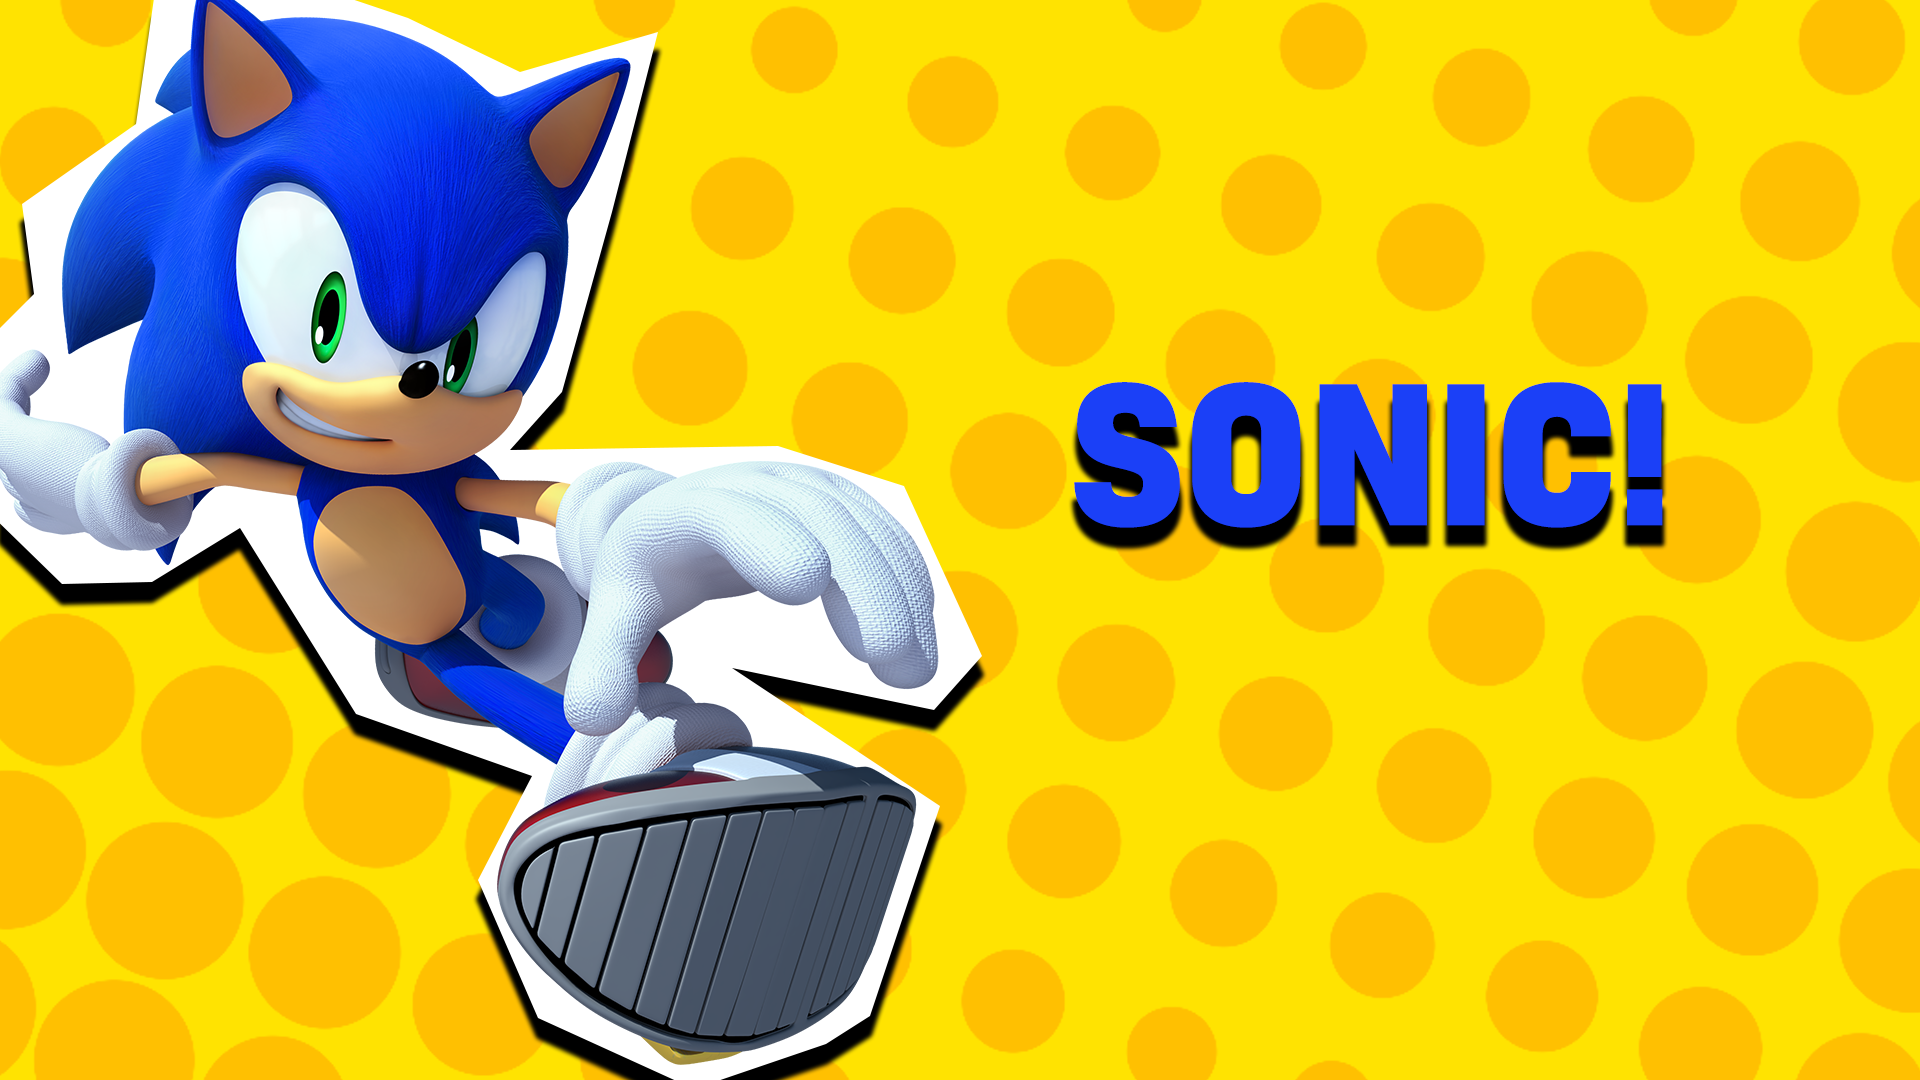 You're neither Kong nor Mario, but Sonic! You're speedy, cheeky and you love gold! And your best friend might just be a fox. 